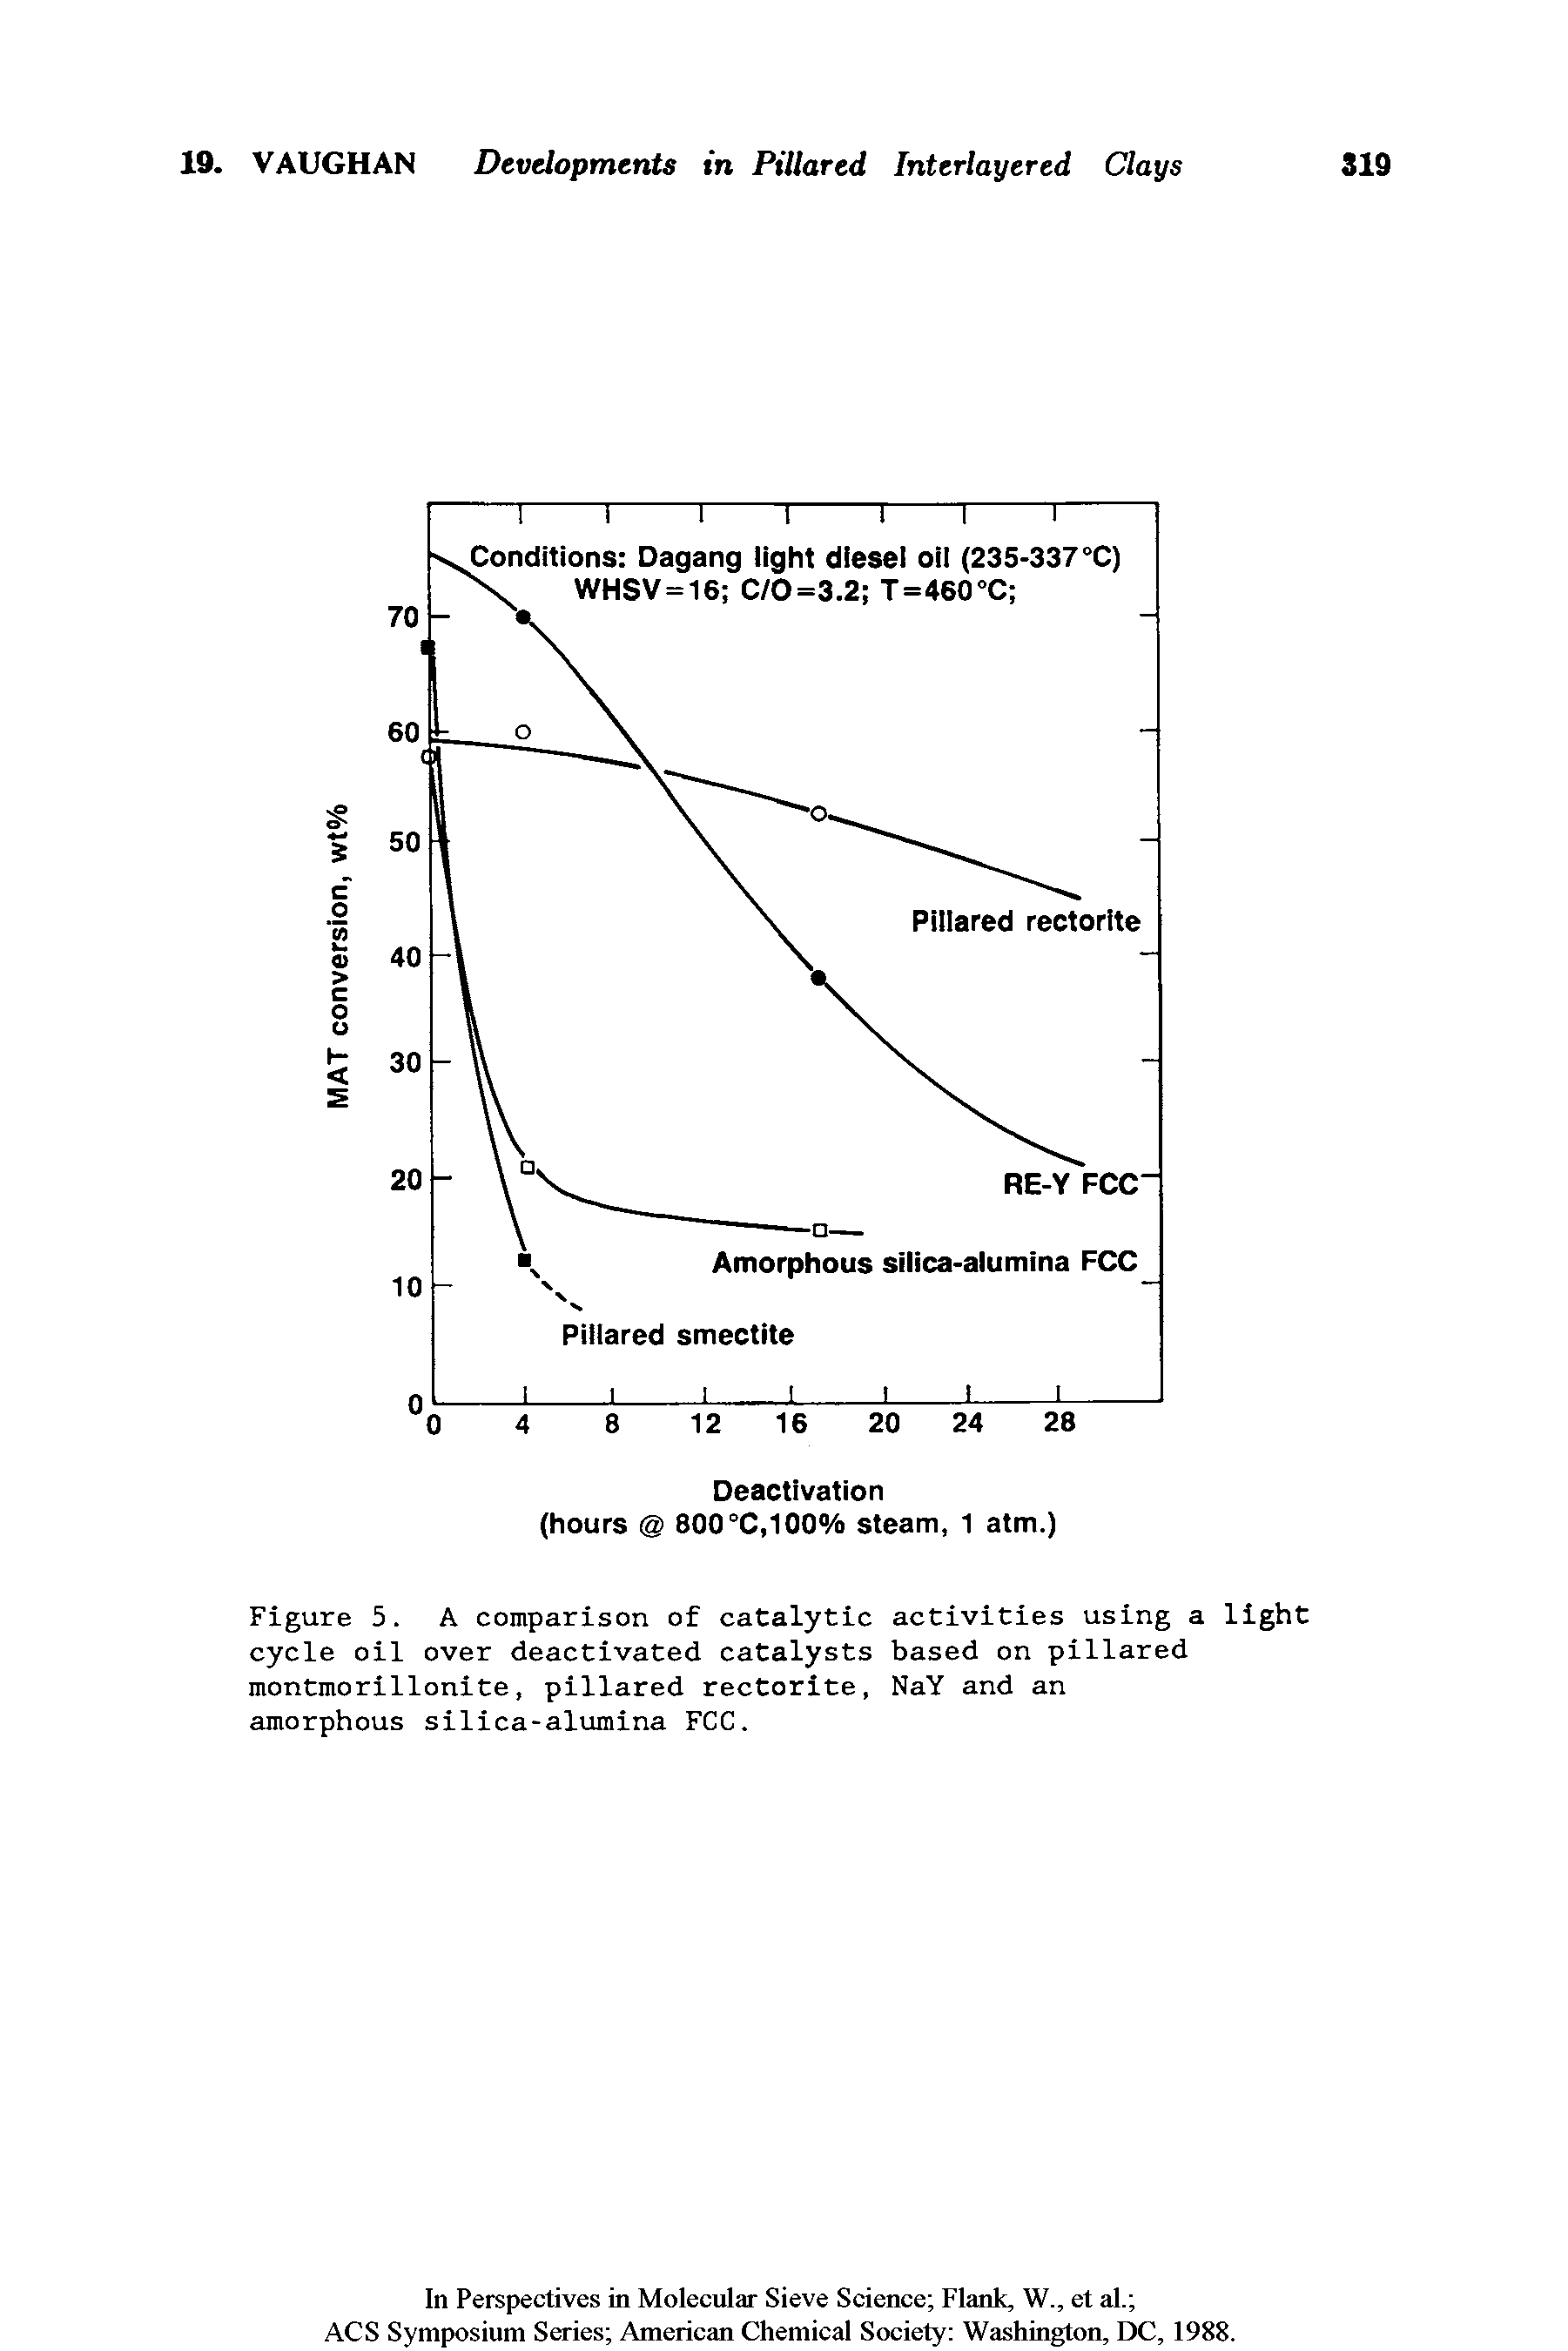 Figure 5. A comparison of catalytic activities using a light cycle oil over deactivated catalysts based on pillared montmorillonite, pillared rectorite, NaY and an amorphous silica-alumina FCC.